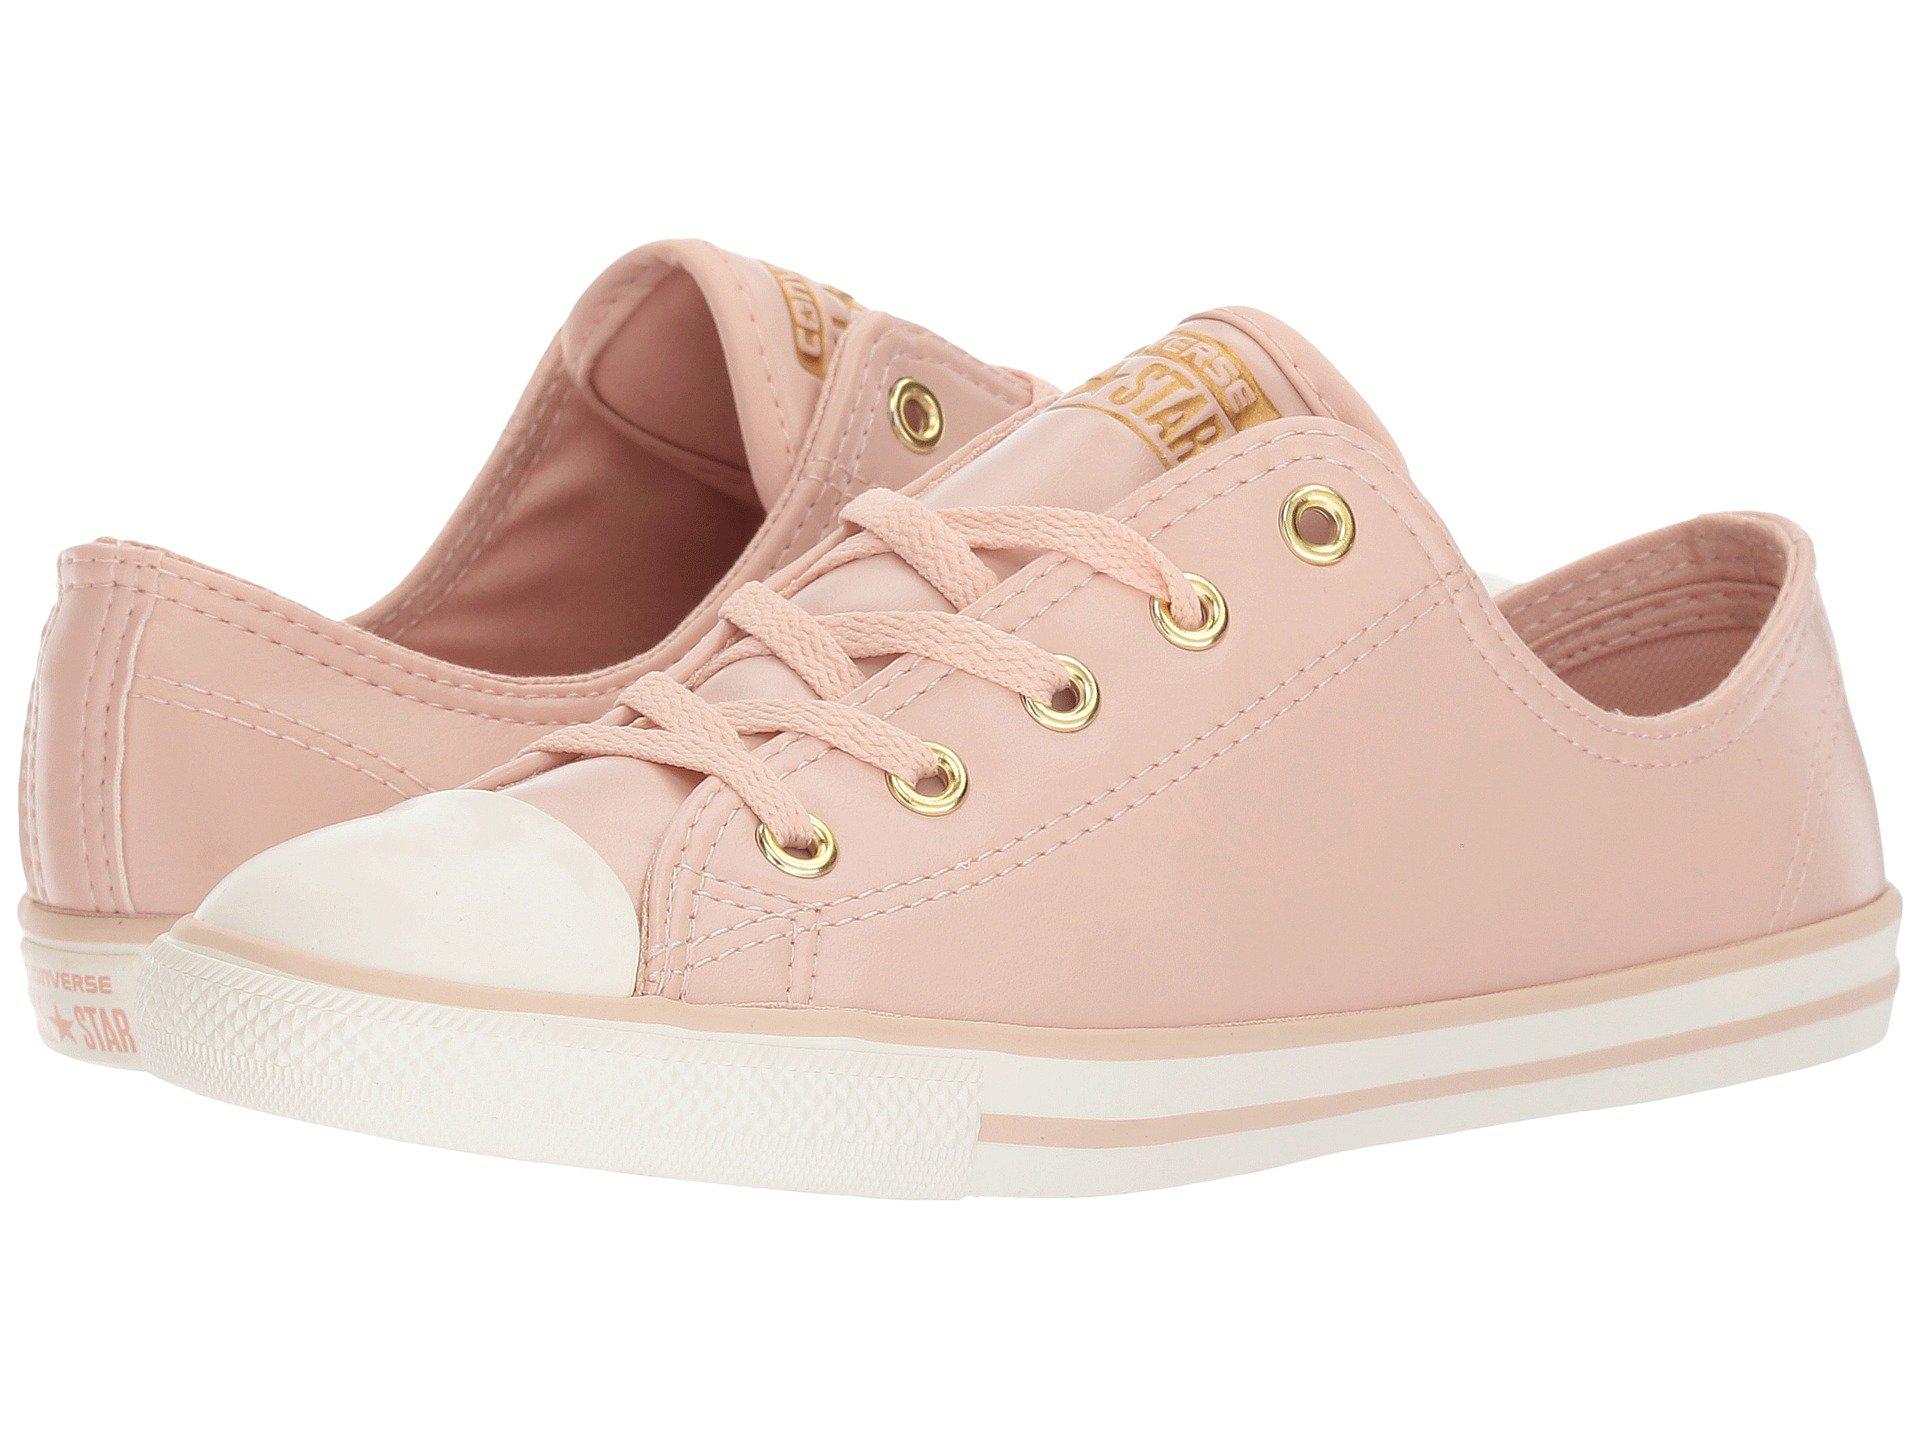 converse dainty leather ox